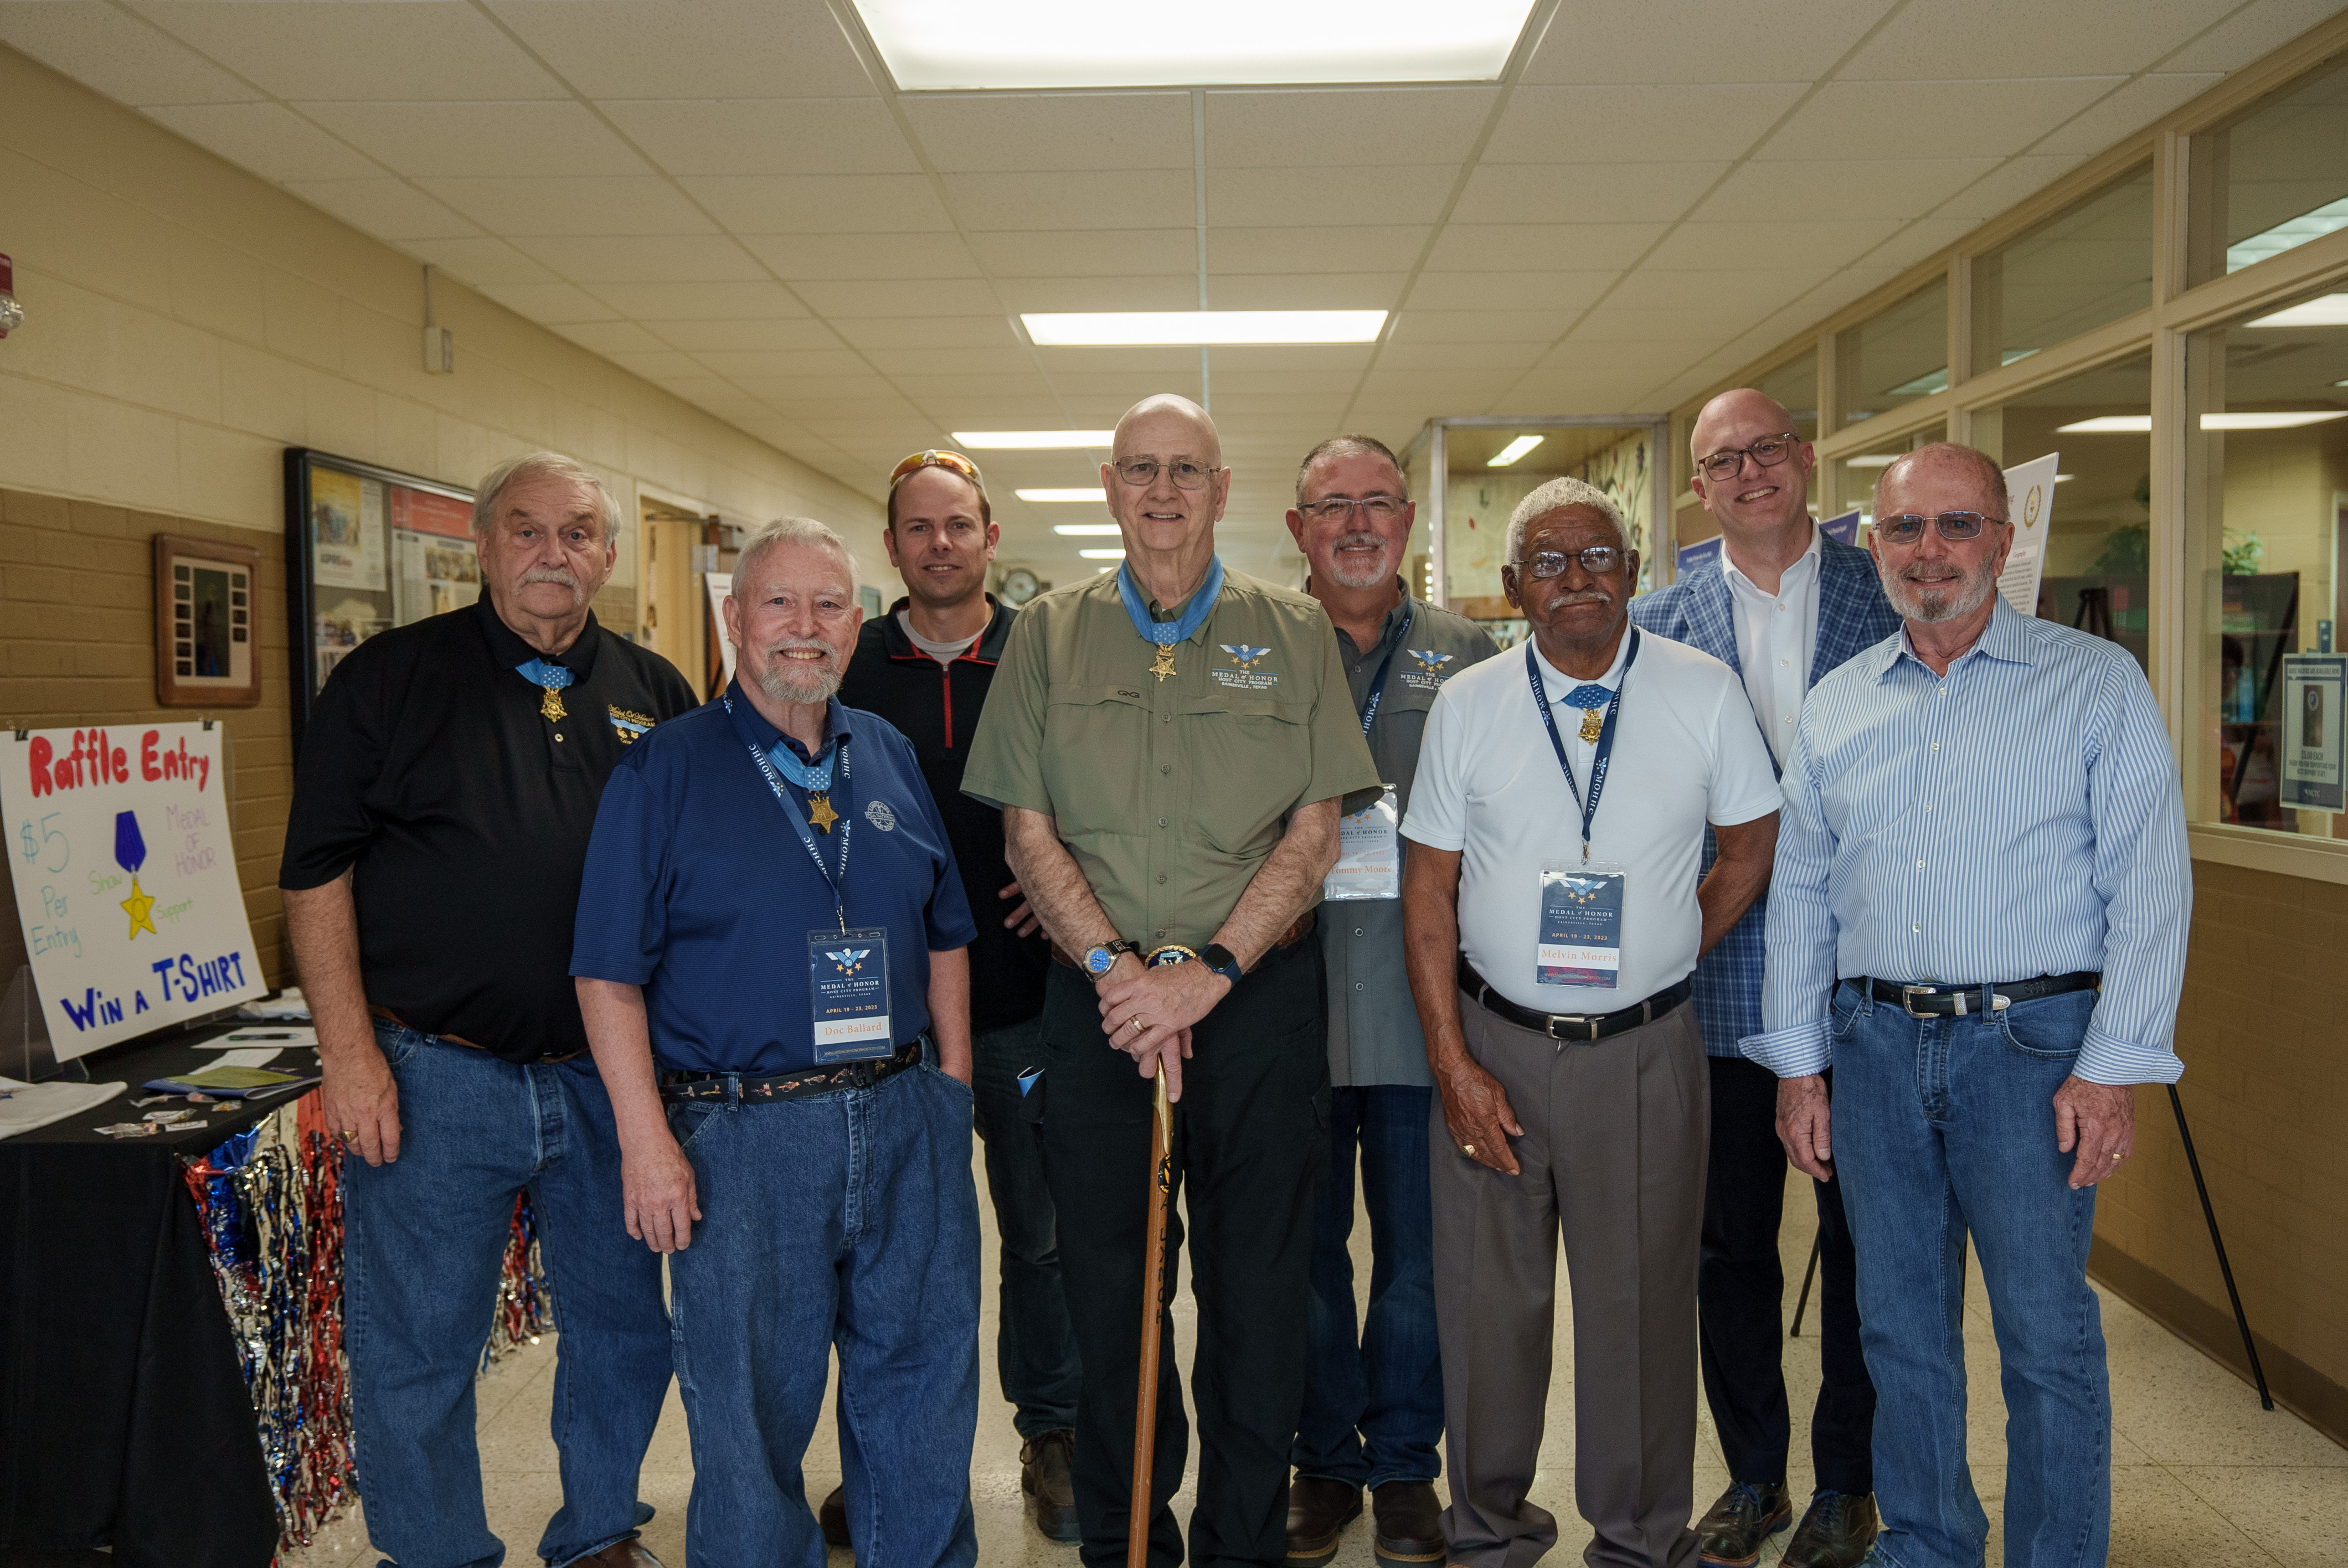 A group photo includes 7 medal of honor recipients and GAF employee Drew Daniel. They are all smiling in a hallway at a medal of honor event in Gainesville, Texas.